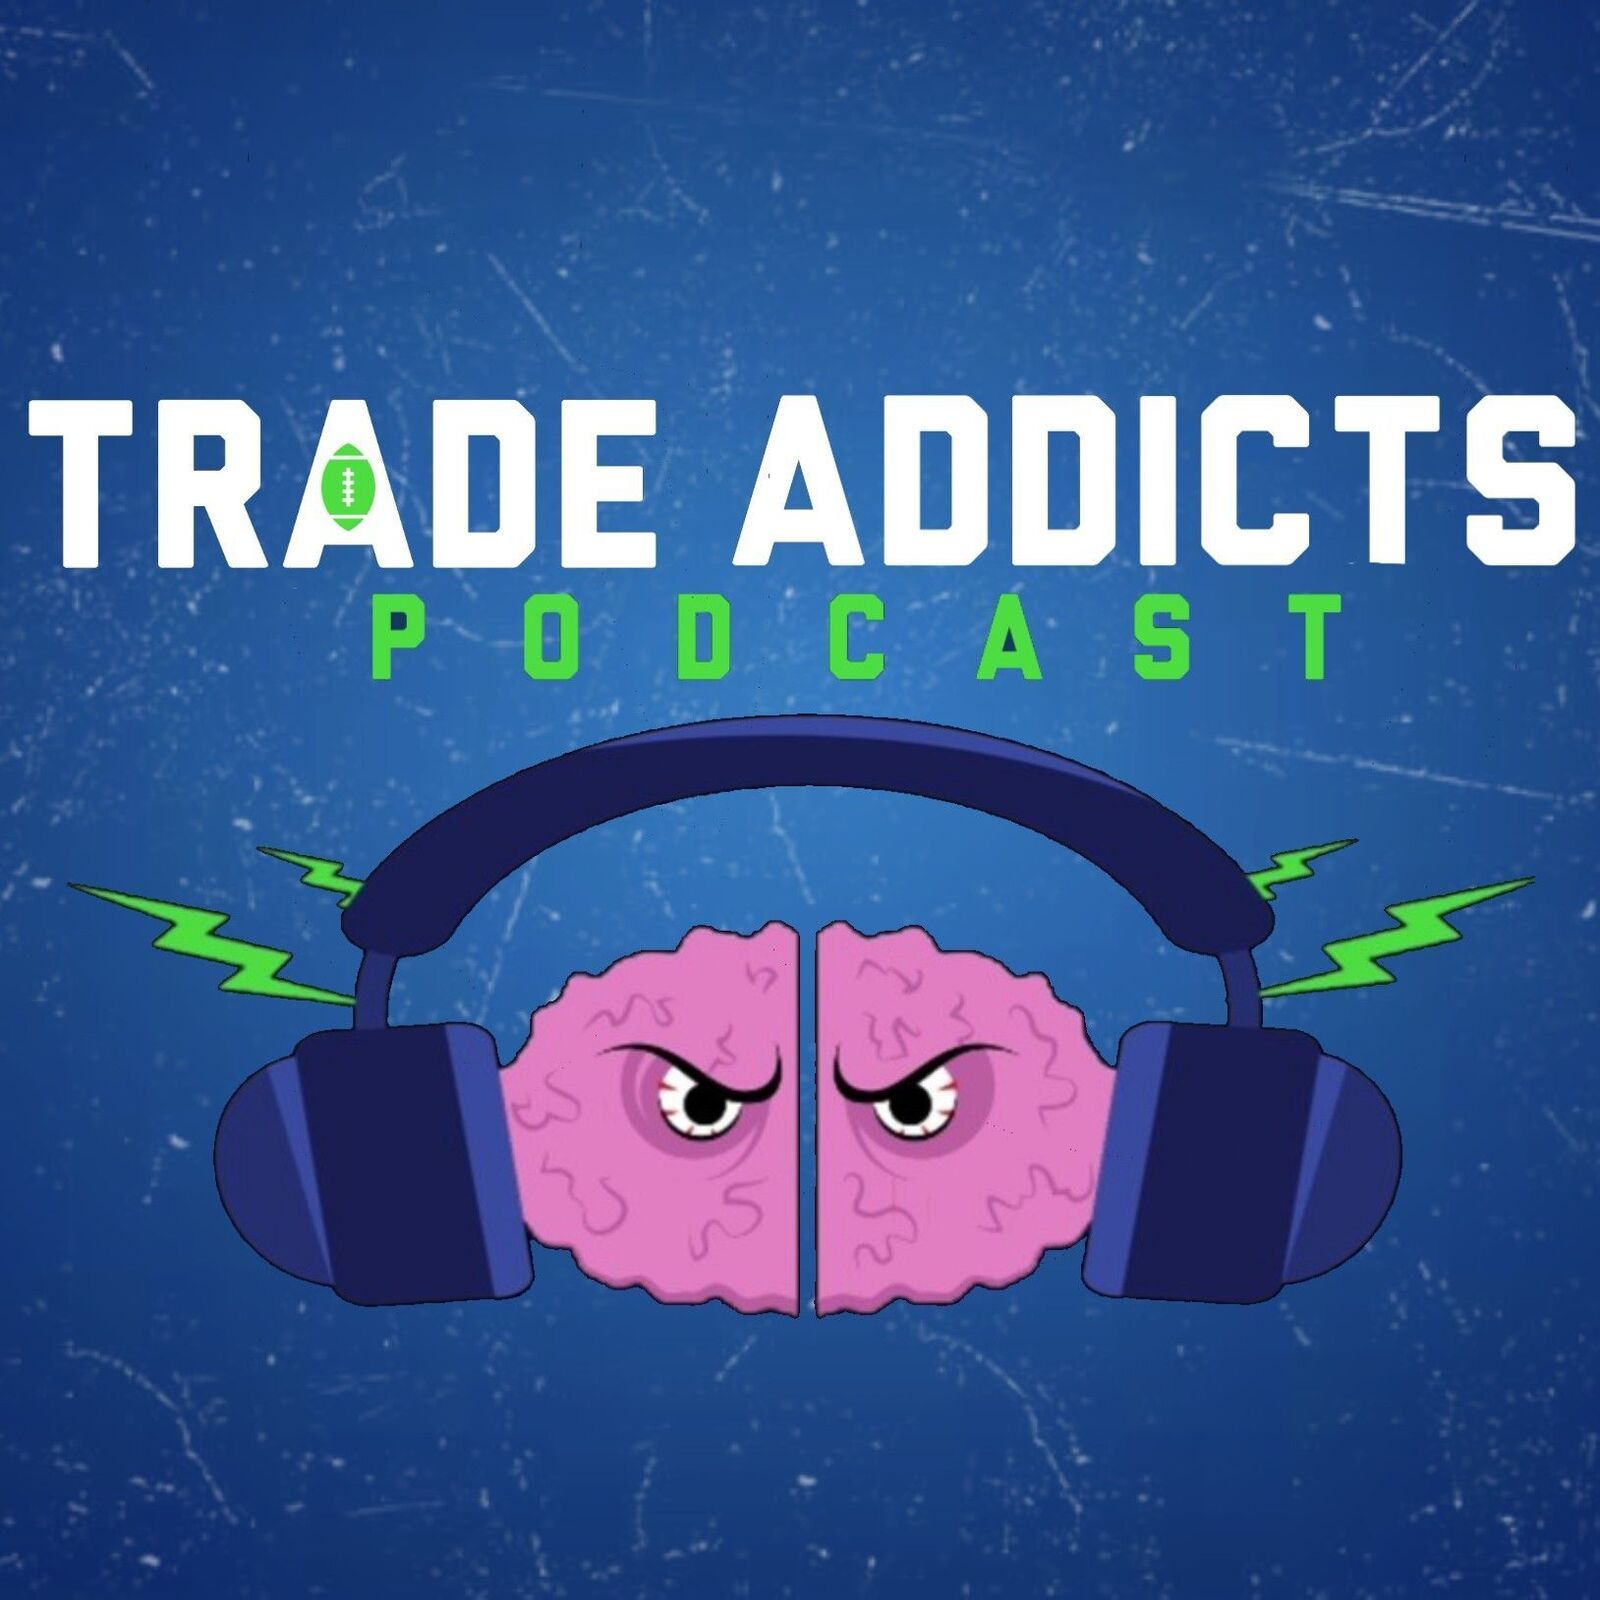 33: Trade Addicts Podcast Session 33 - Podception